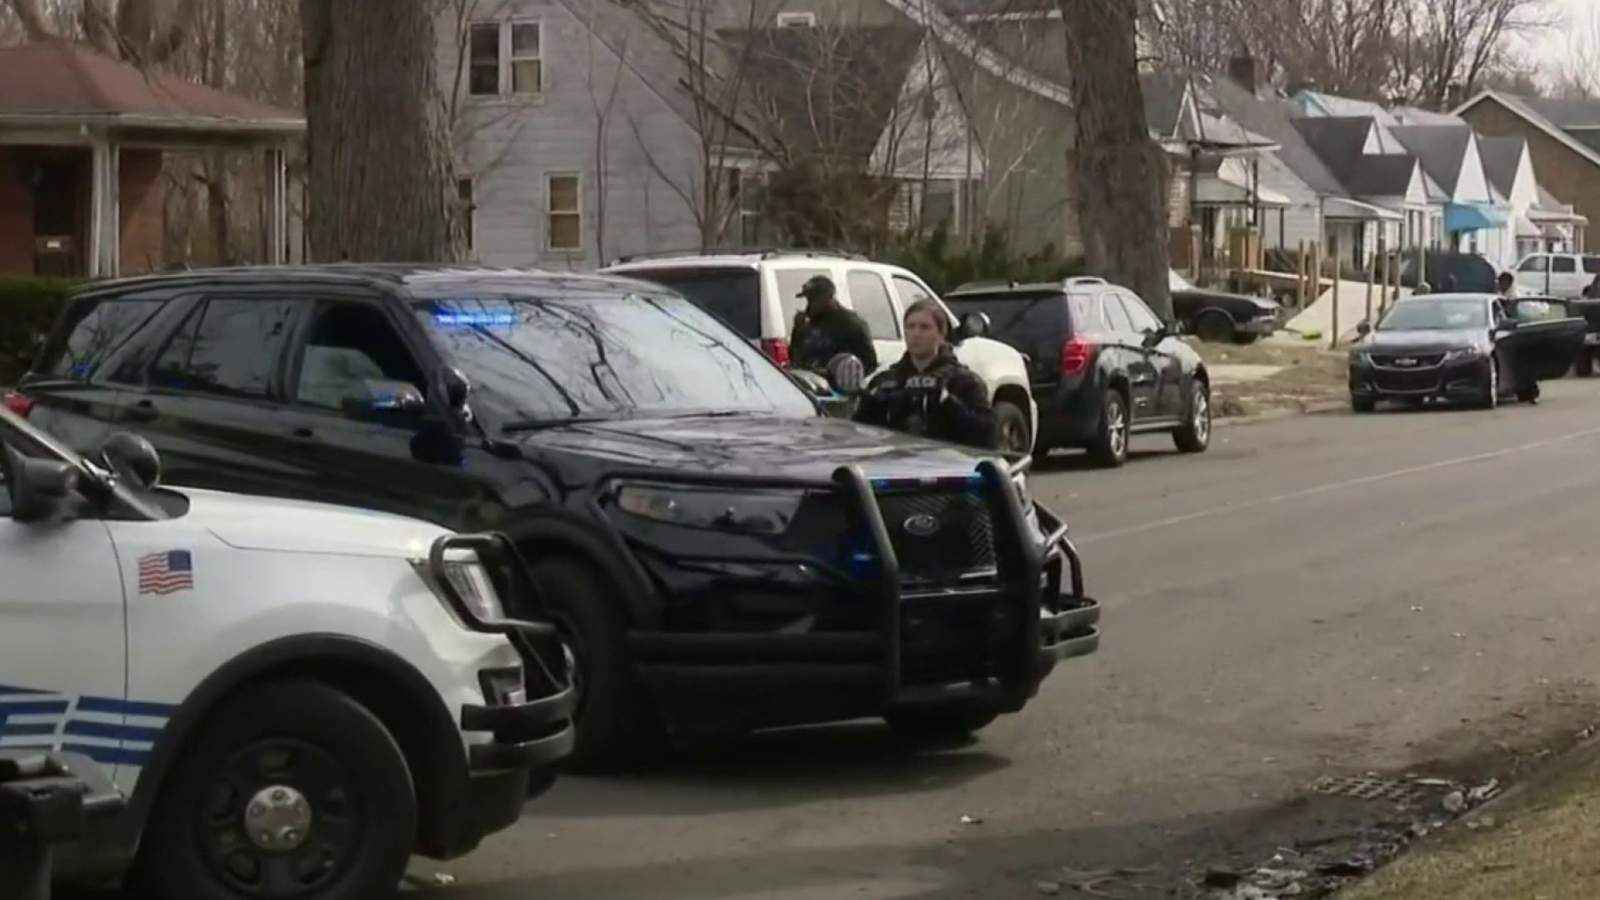 Police say child accidentally shot 13-year-old in Detroit home